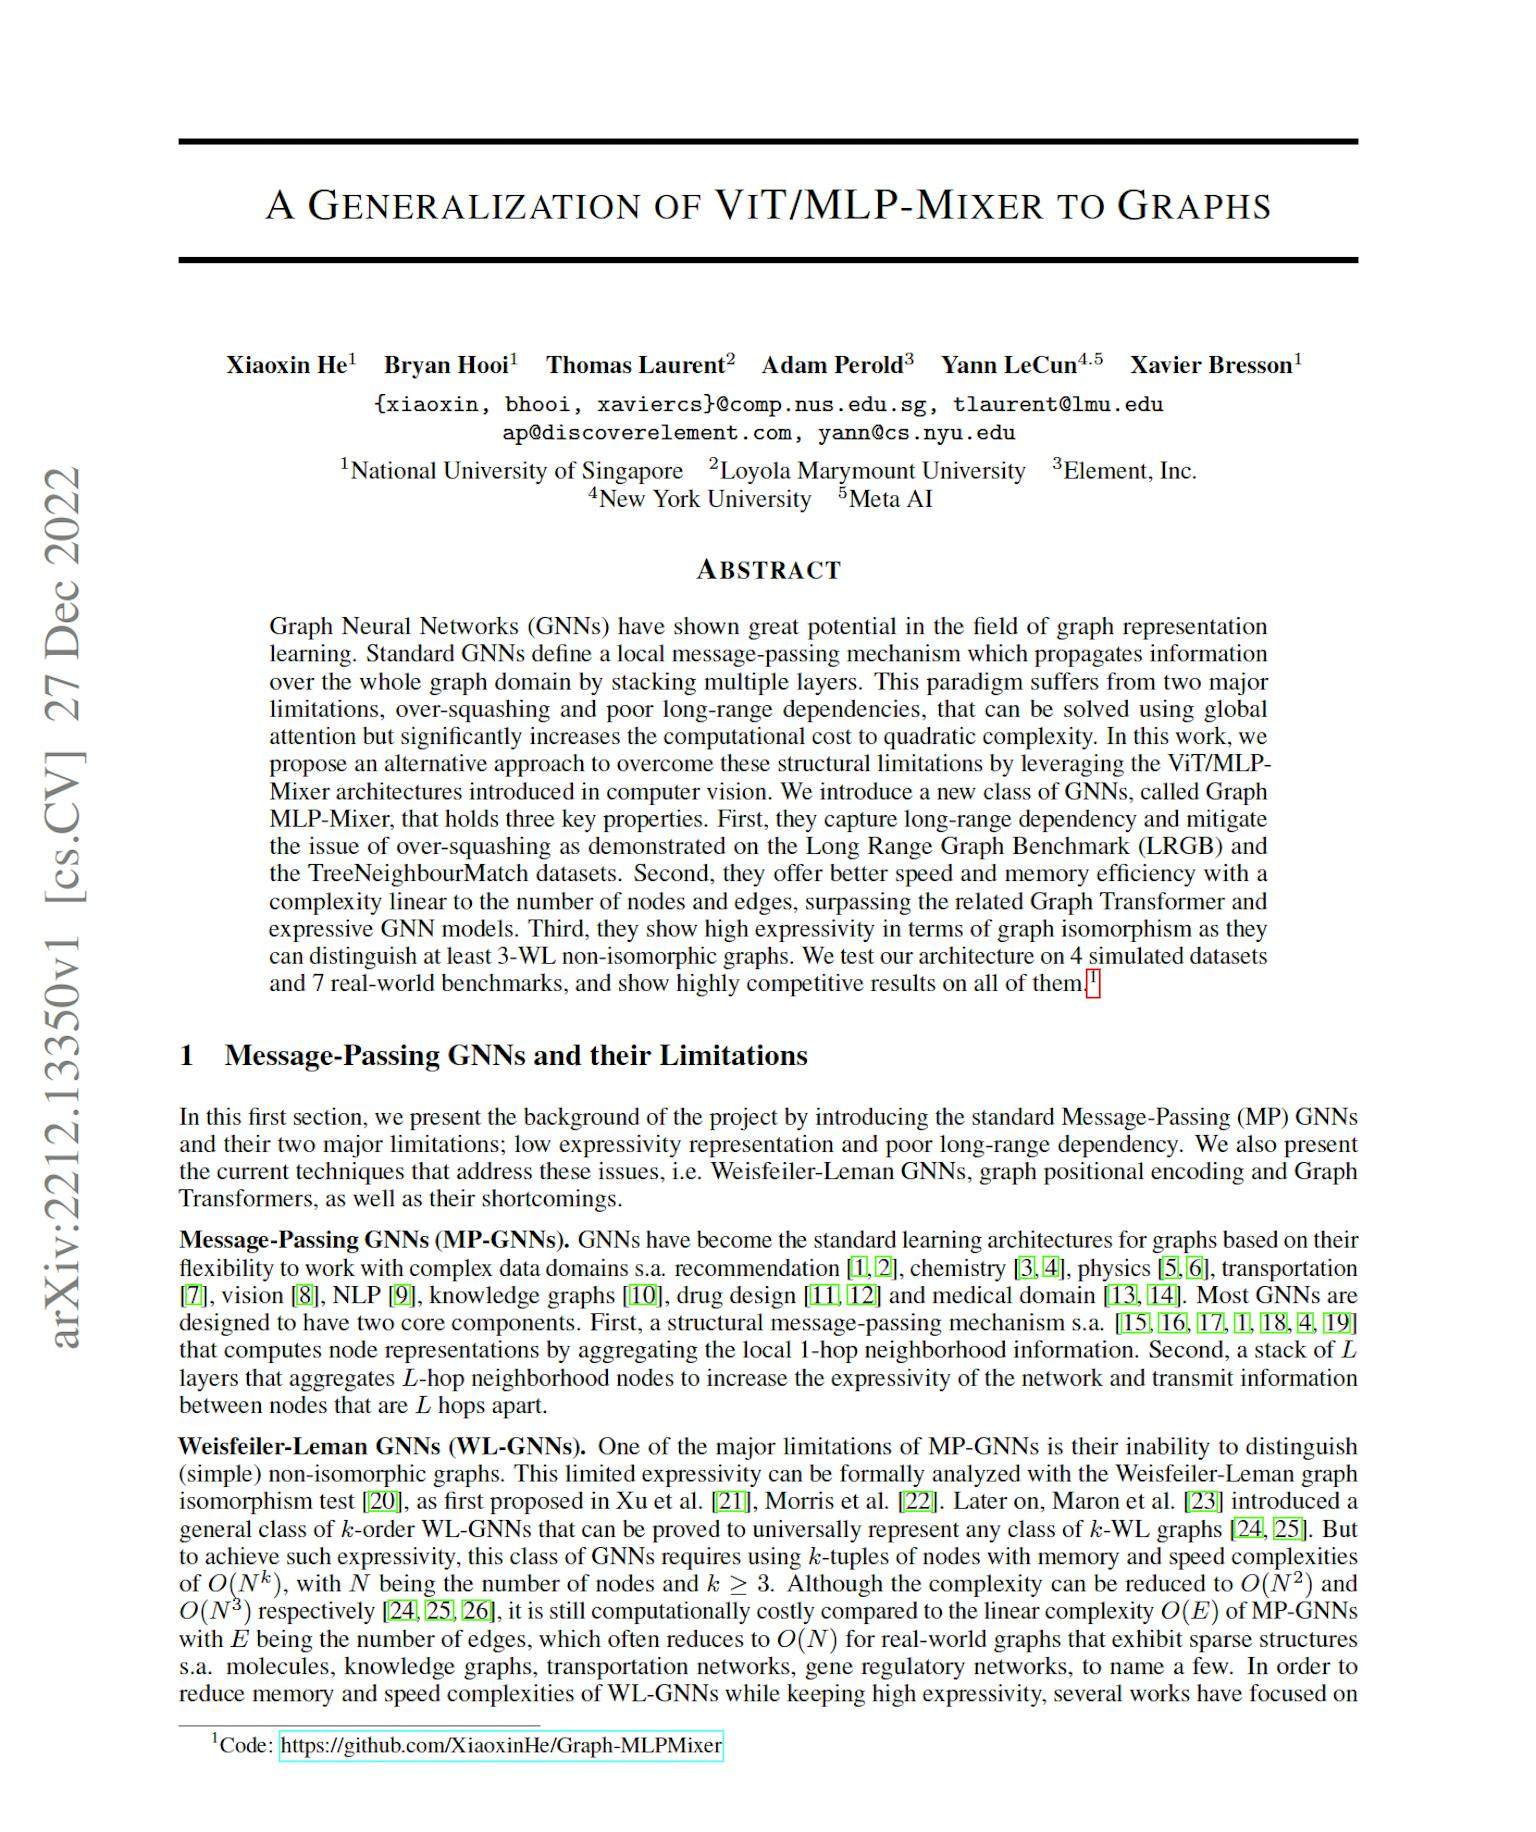 A Generalization Of ViT/MLP-Mixer to Graphs